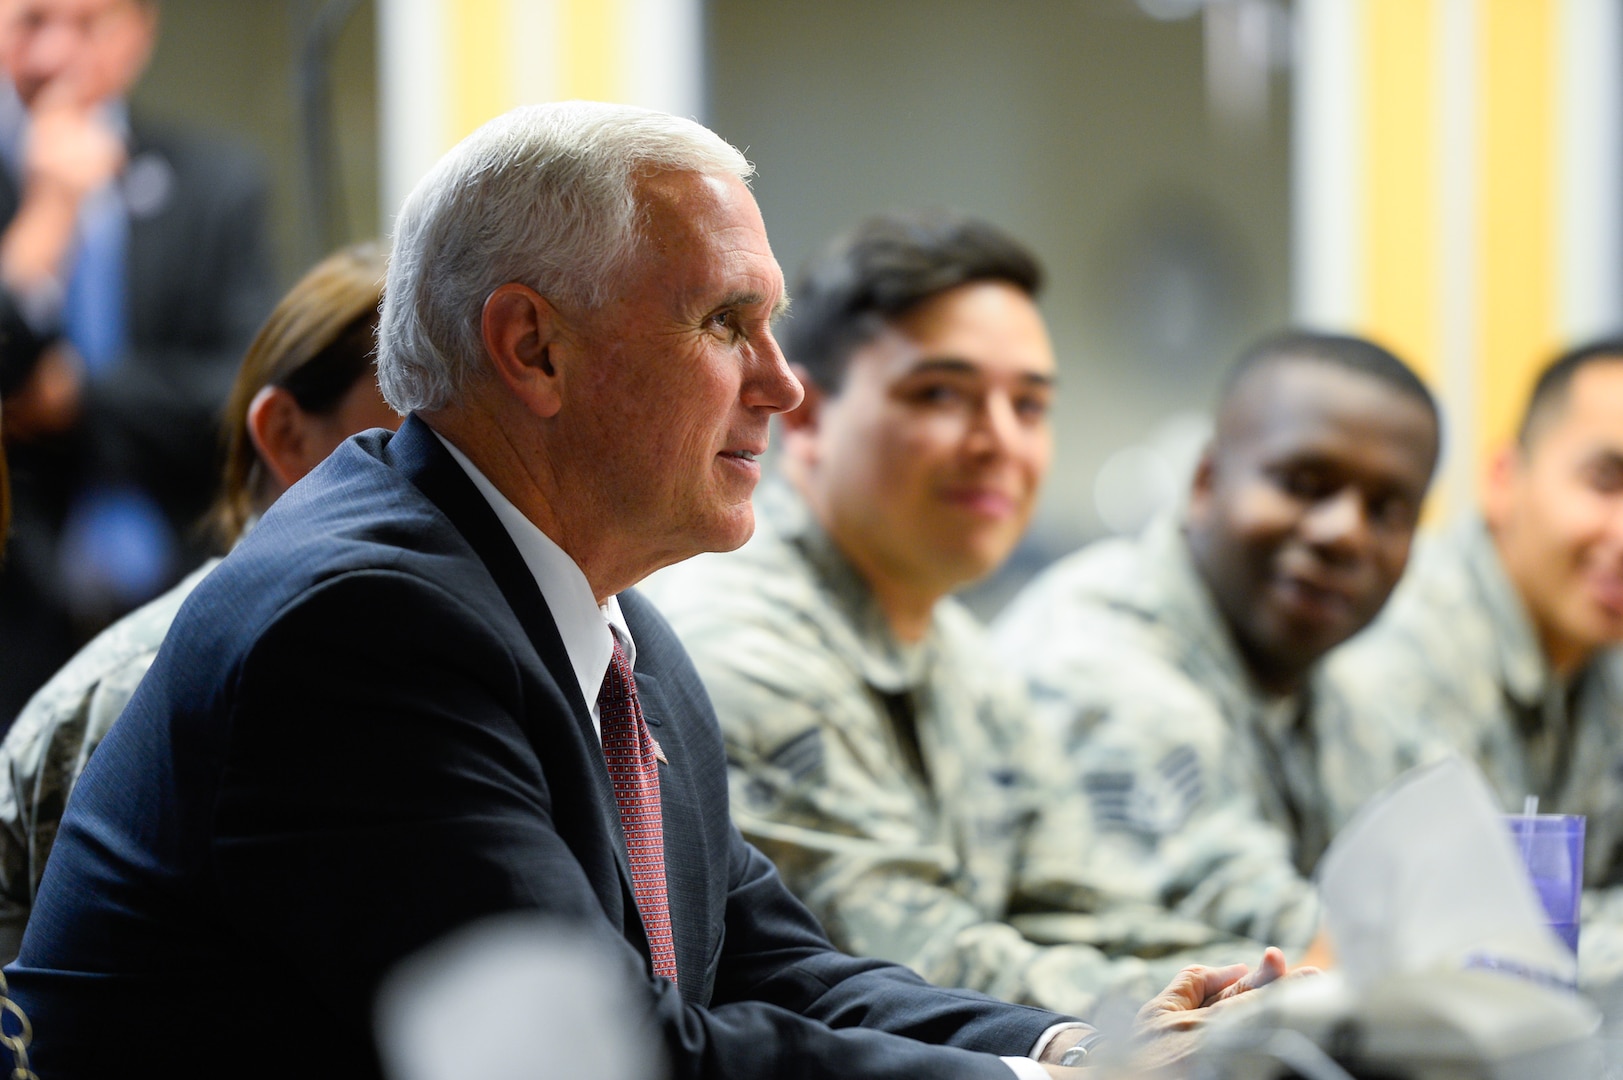 SCHRIEVER AIR FORCE BASE, Colo. --  Vice President Mike Pence visits Peterson AFB, Schriever AFB and Cheyenne Mountain Air Force Station for a closer look at how space plays an integral role in military operations, June 23, 2017. (U.S. Air Force photo/Christopher DeWitt)